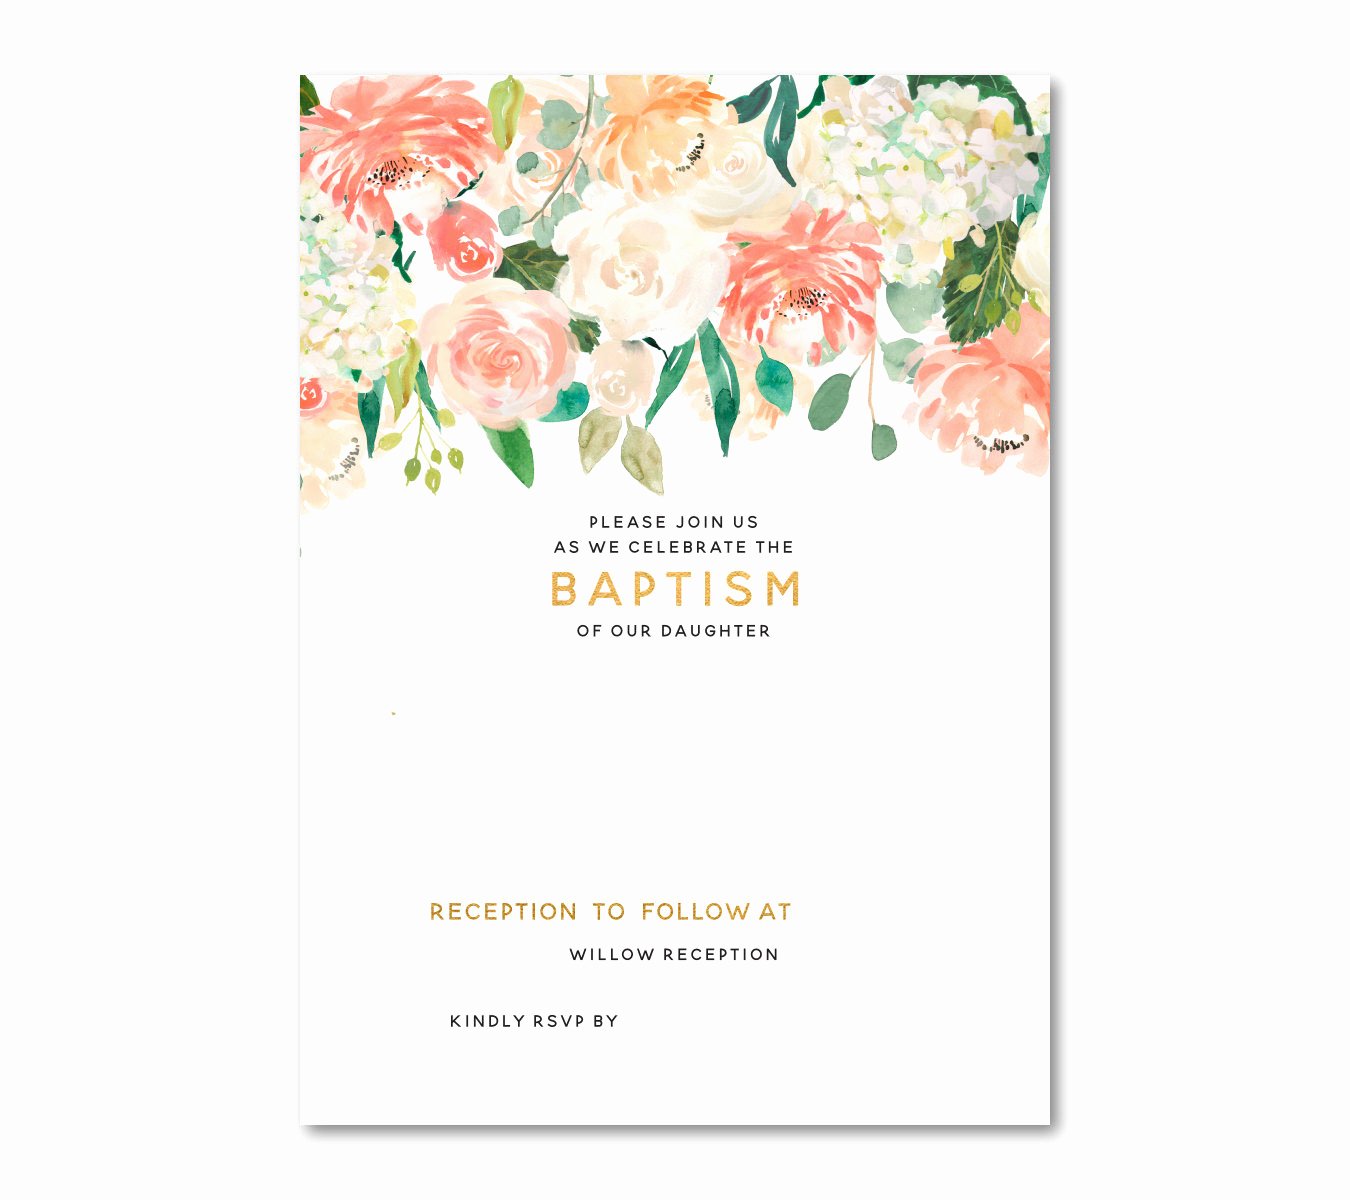 Floral Invitation Template Lovely Free Floral Baptism Invitation Template